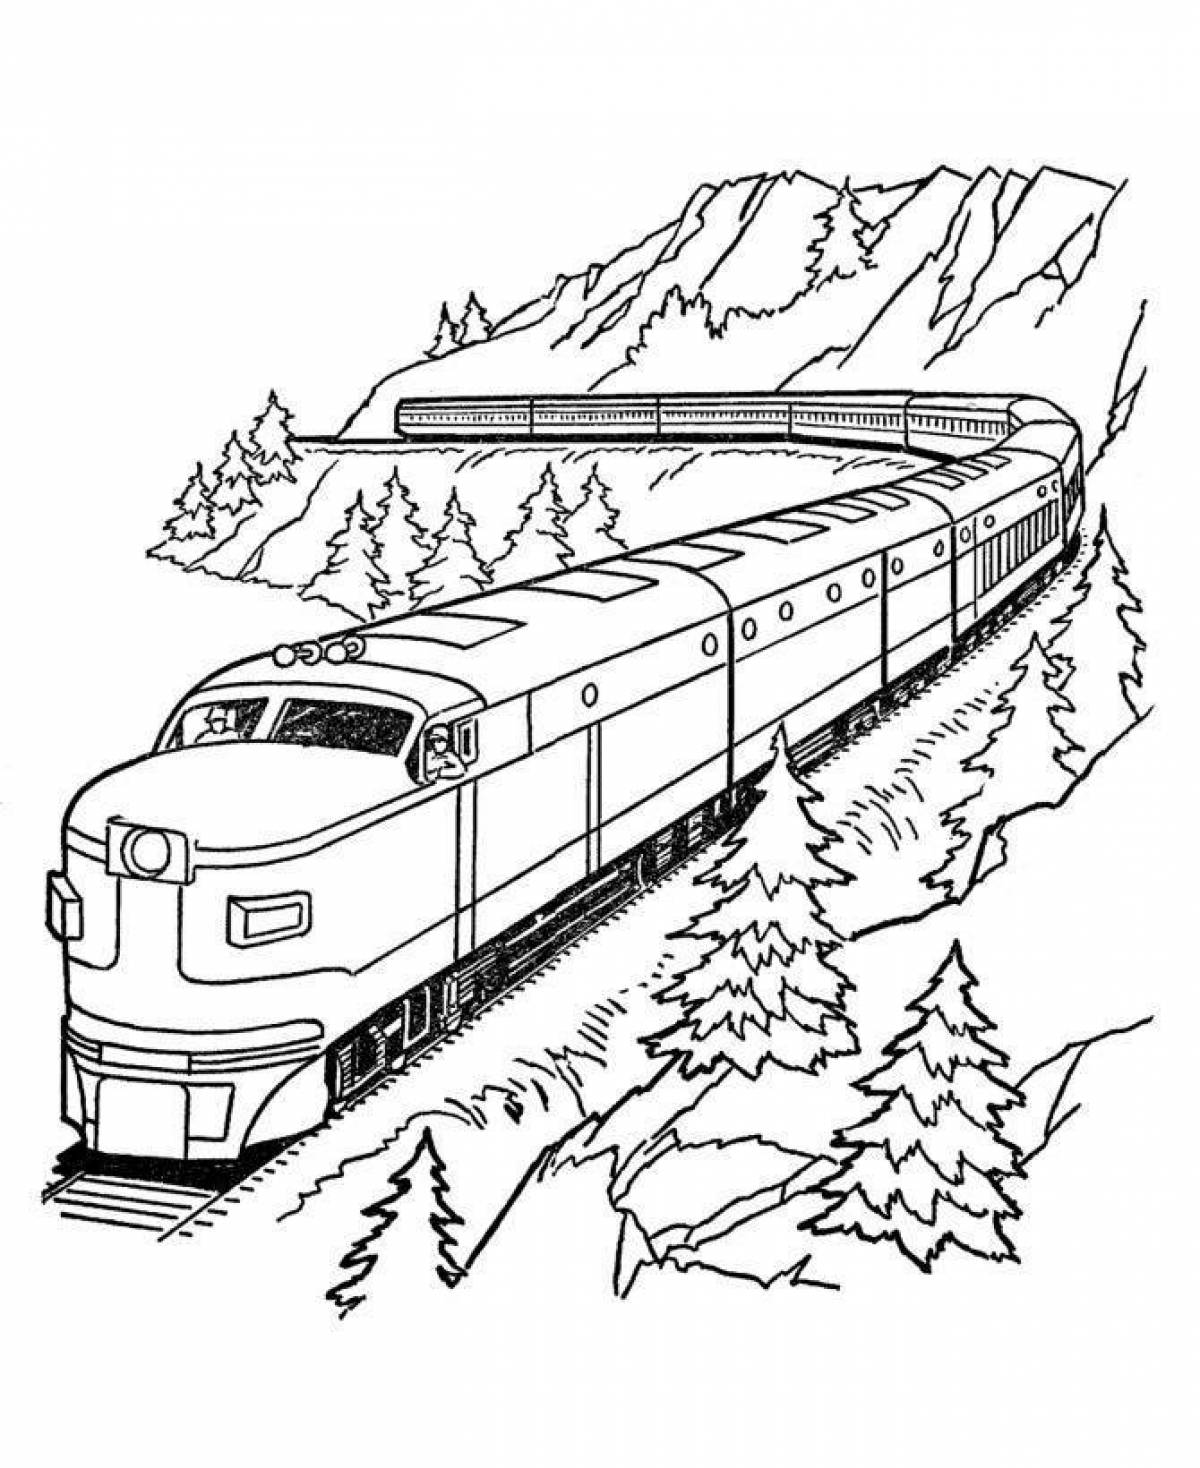 Train in the mountains